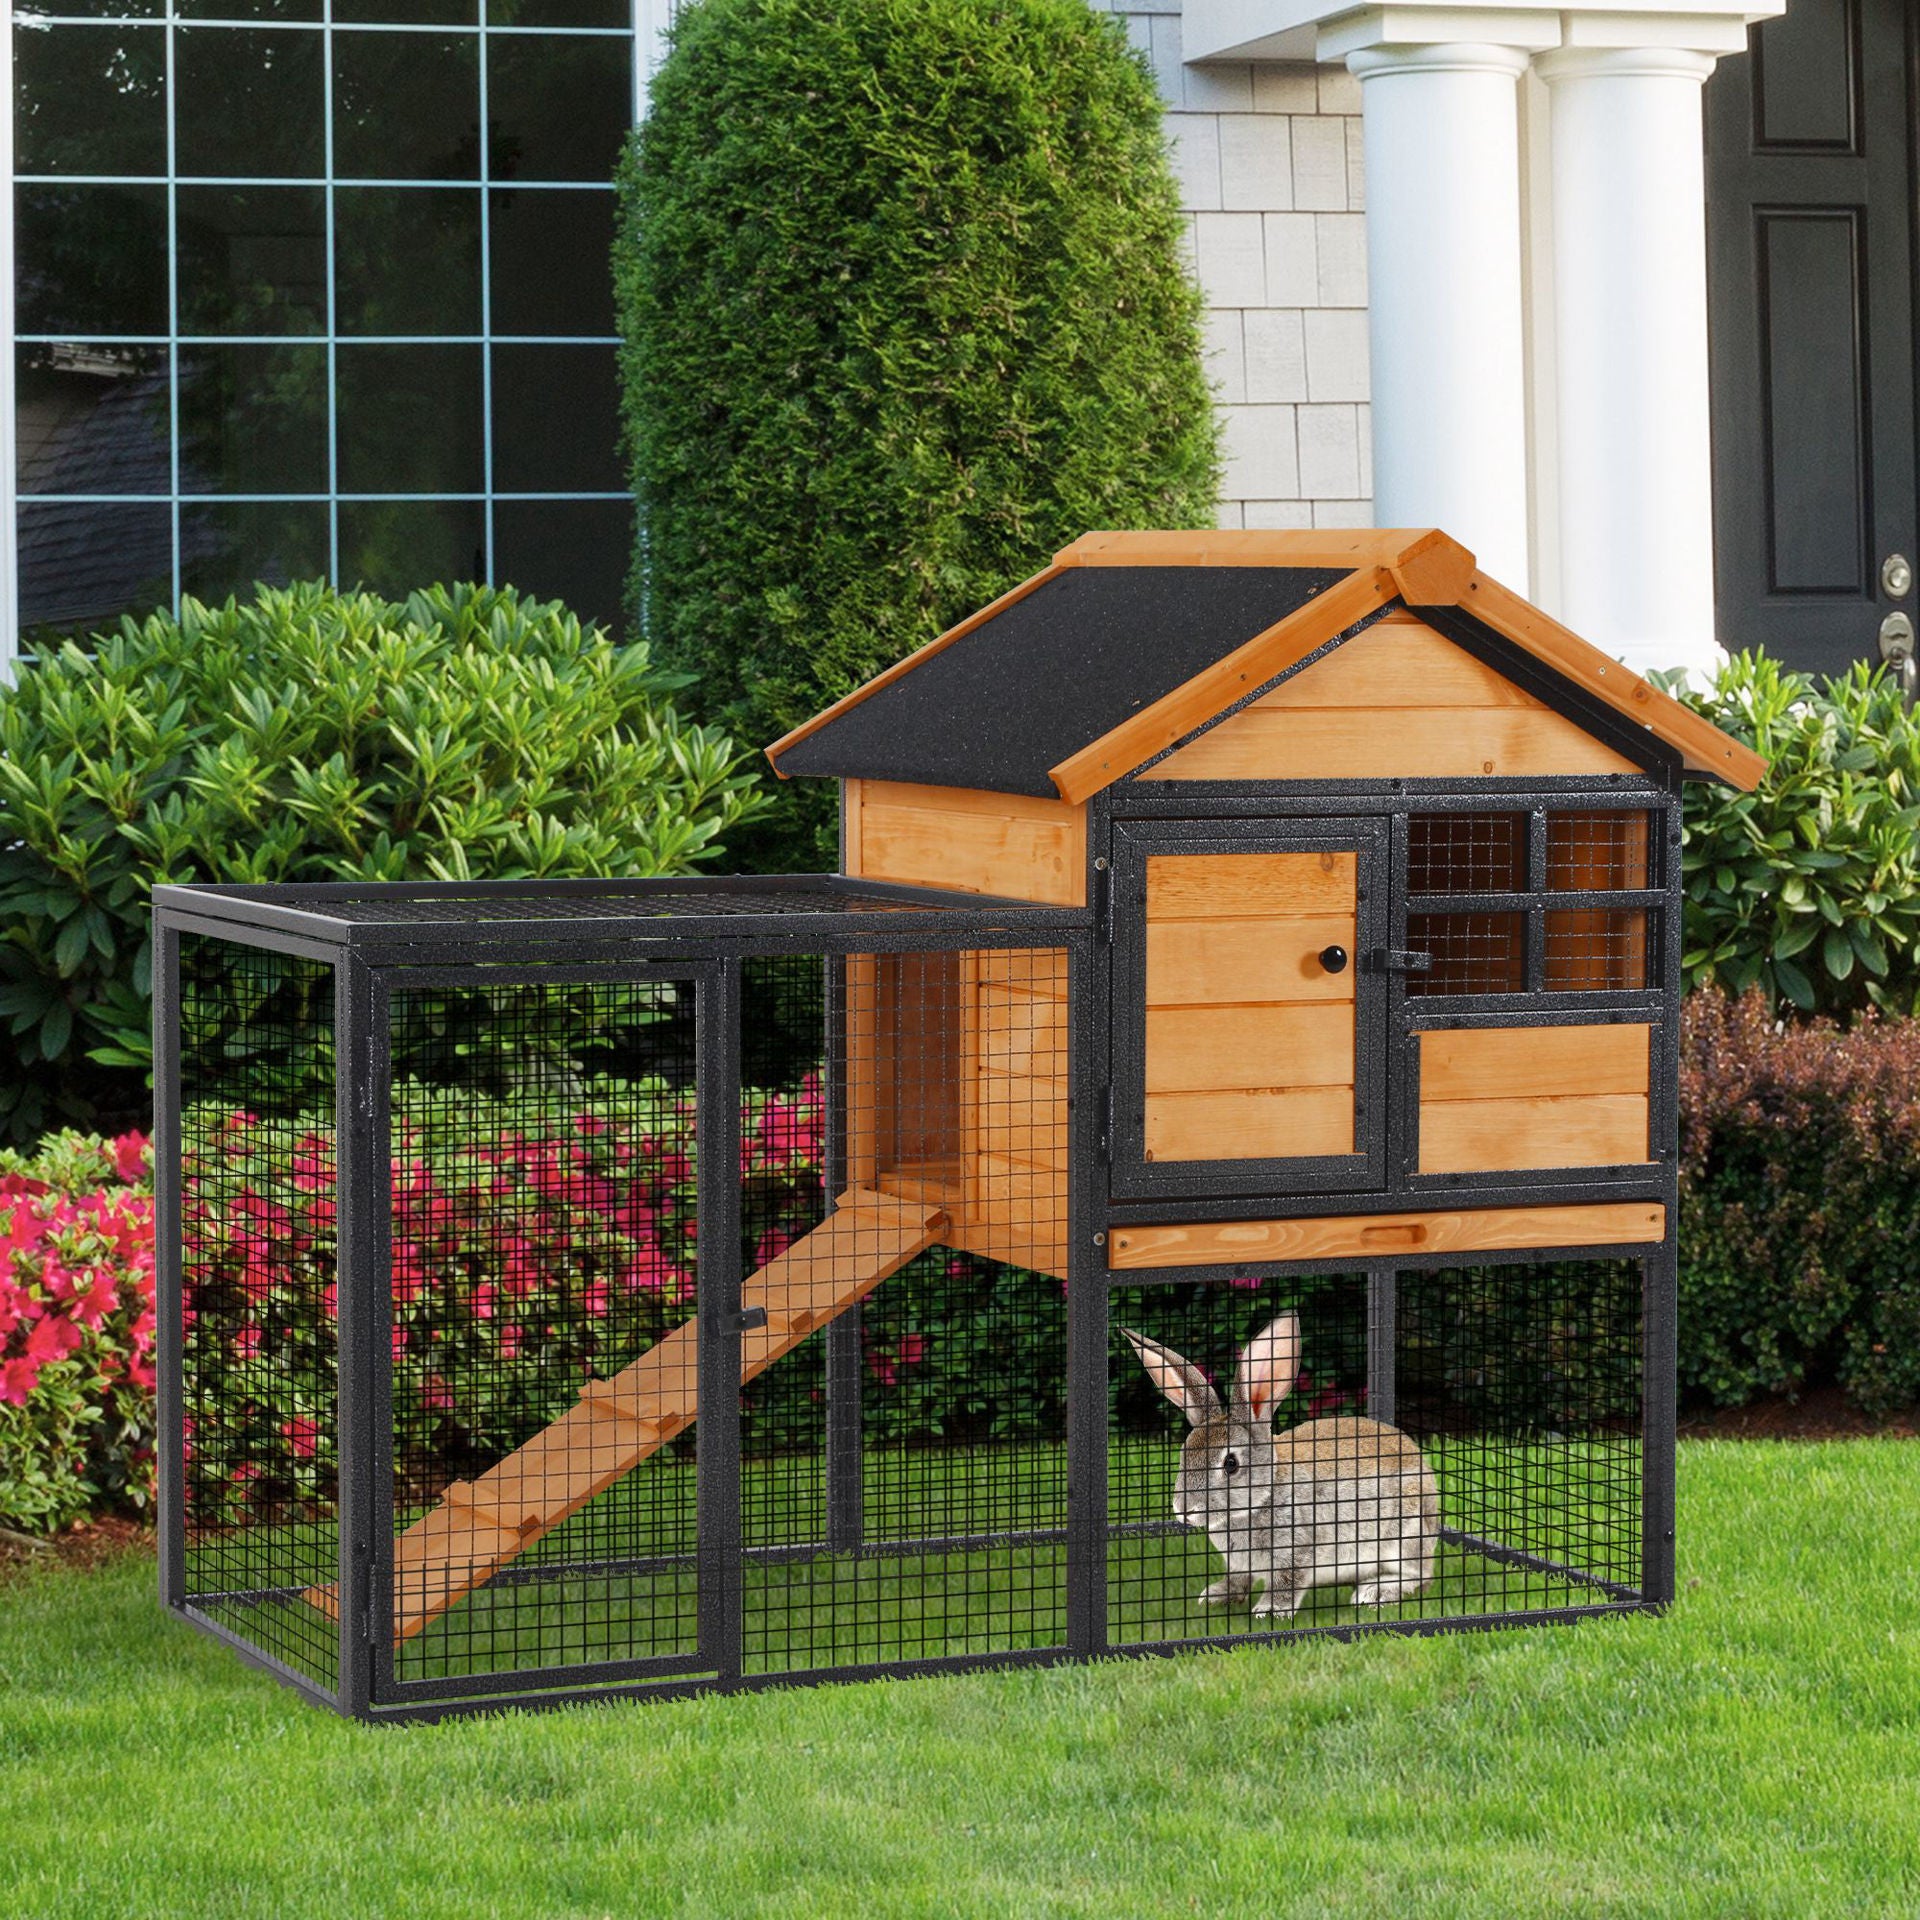 Nancy's Aaron Lake Animal Hutch - Rabbit Hutch with outdoor enclosure and slope 122 cm x 63 cm x 92 cm Wood Metal